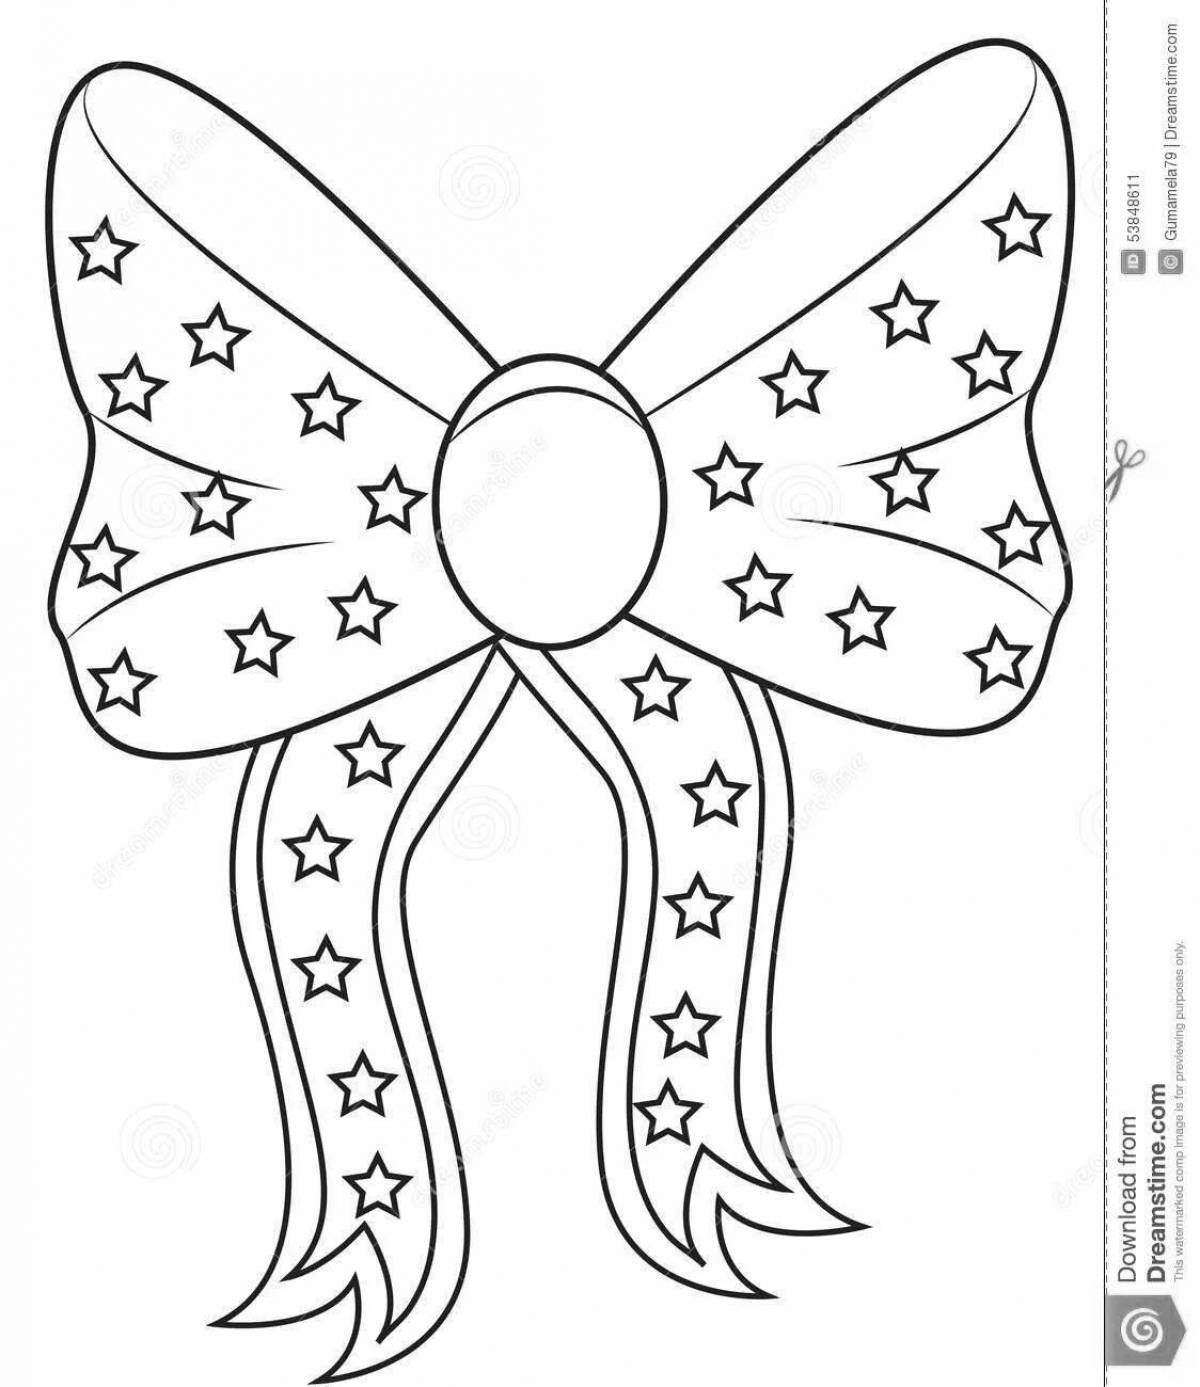 Great coloring bow for kids